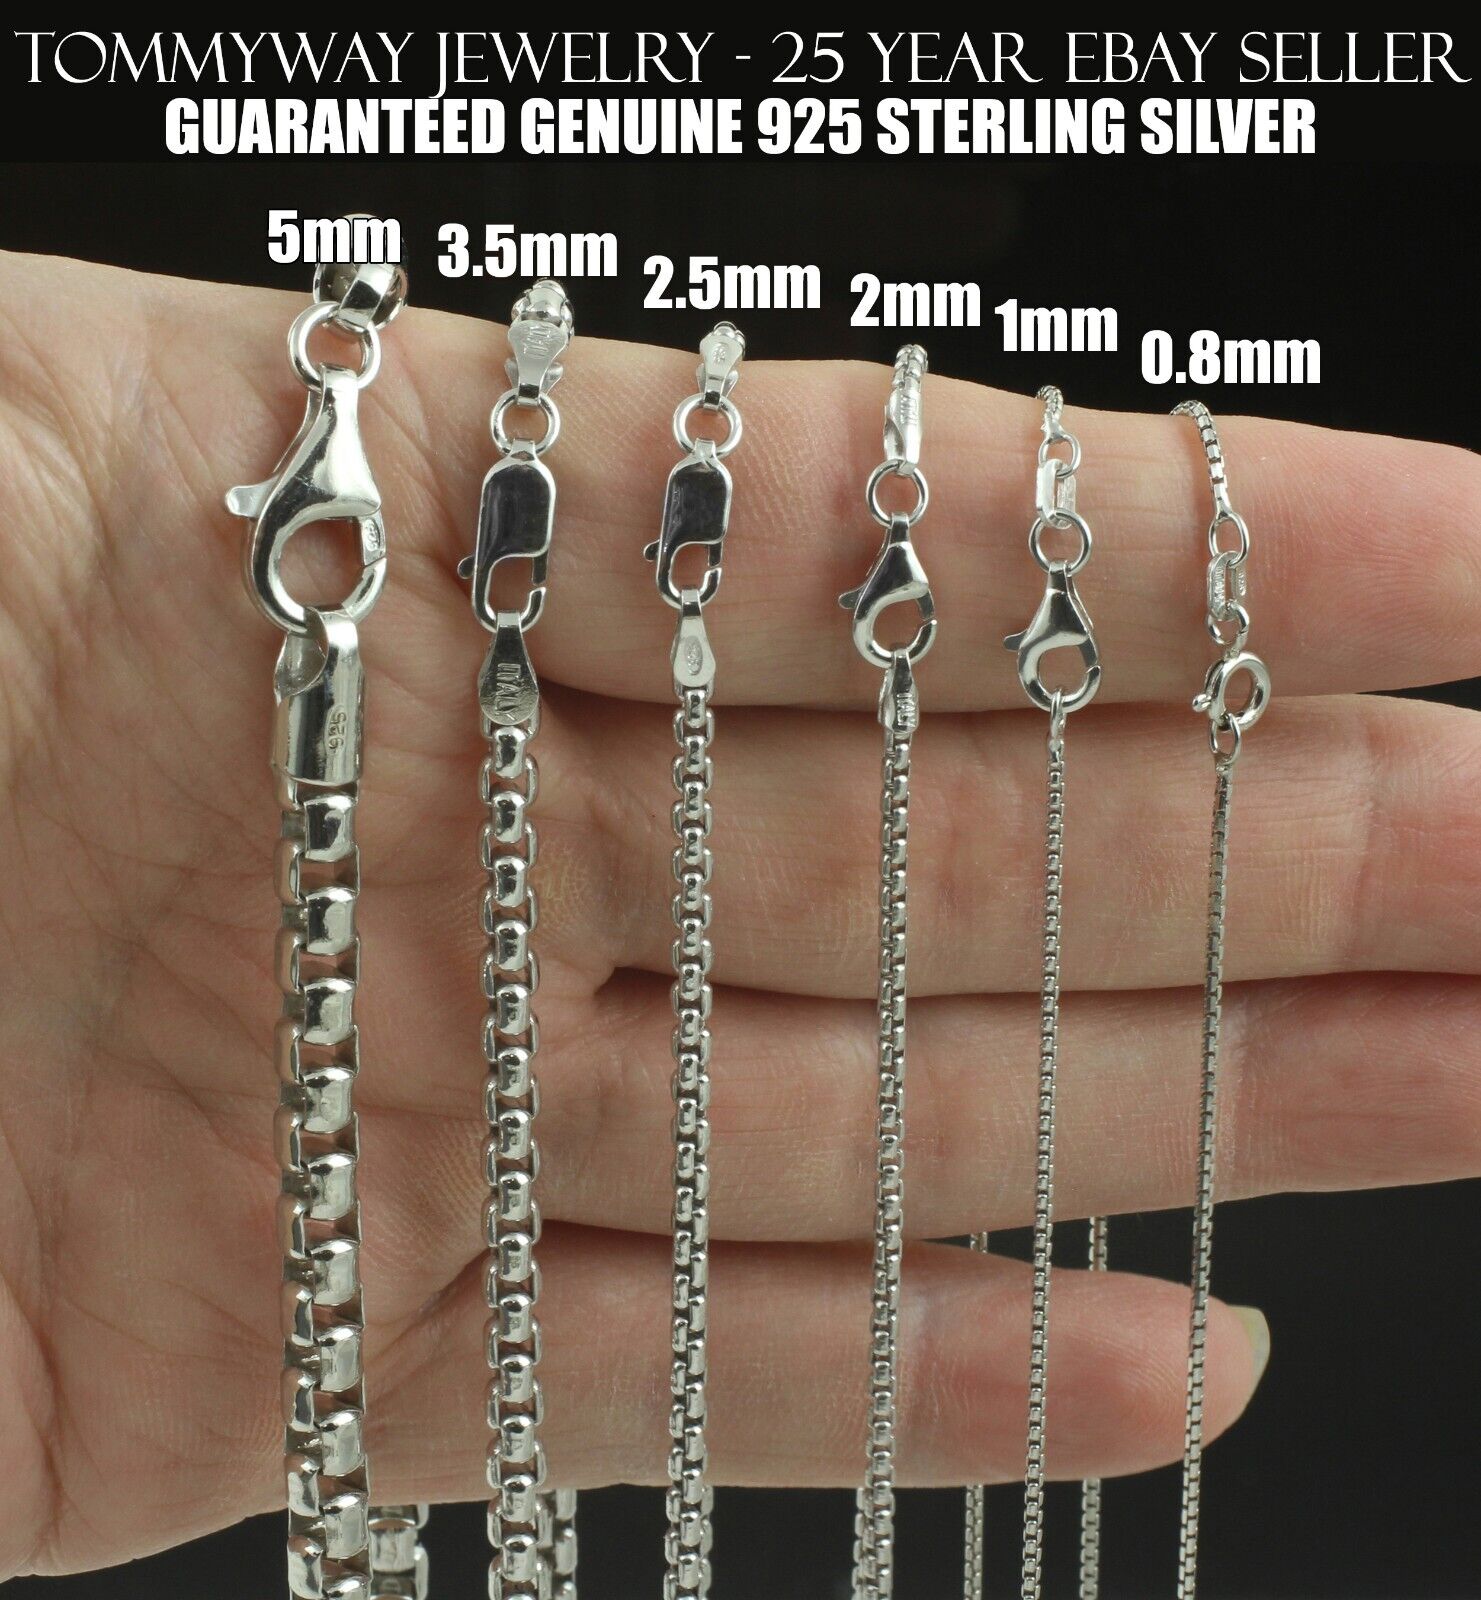 Guaranteed 925 Sterling Silver Rhodium Plated Round Box Chain Necklace 1mm-5mm